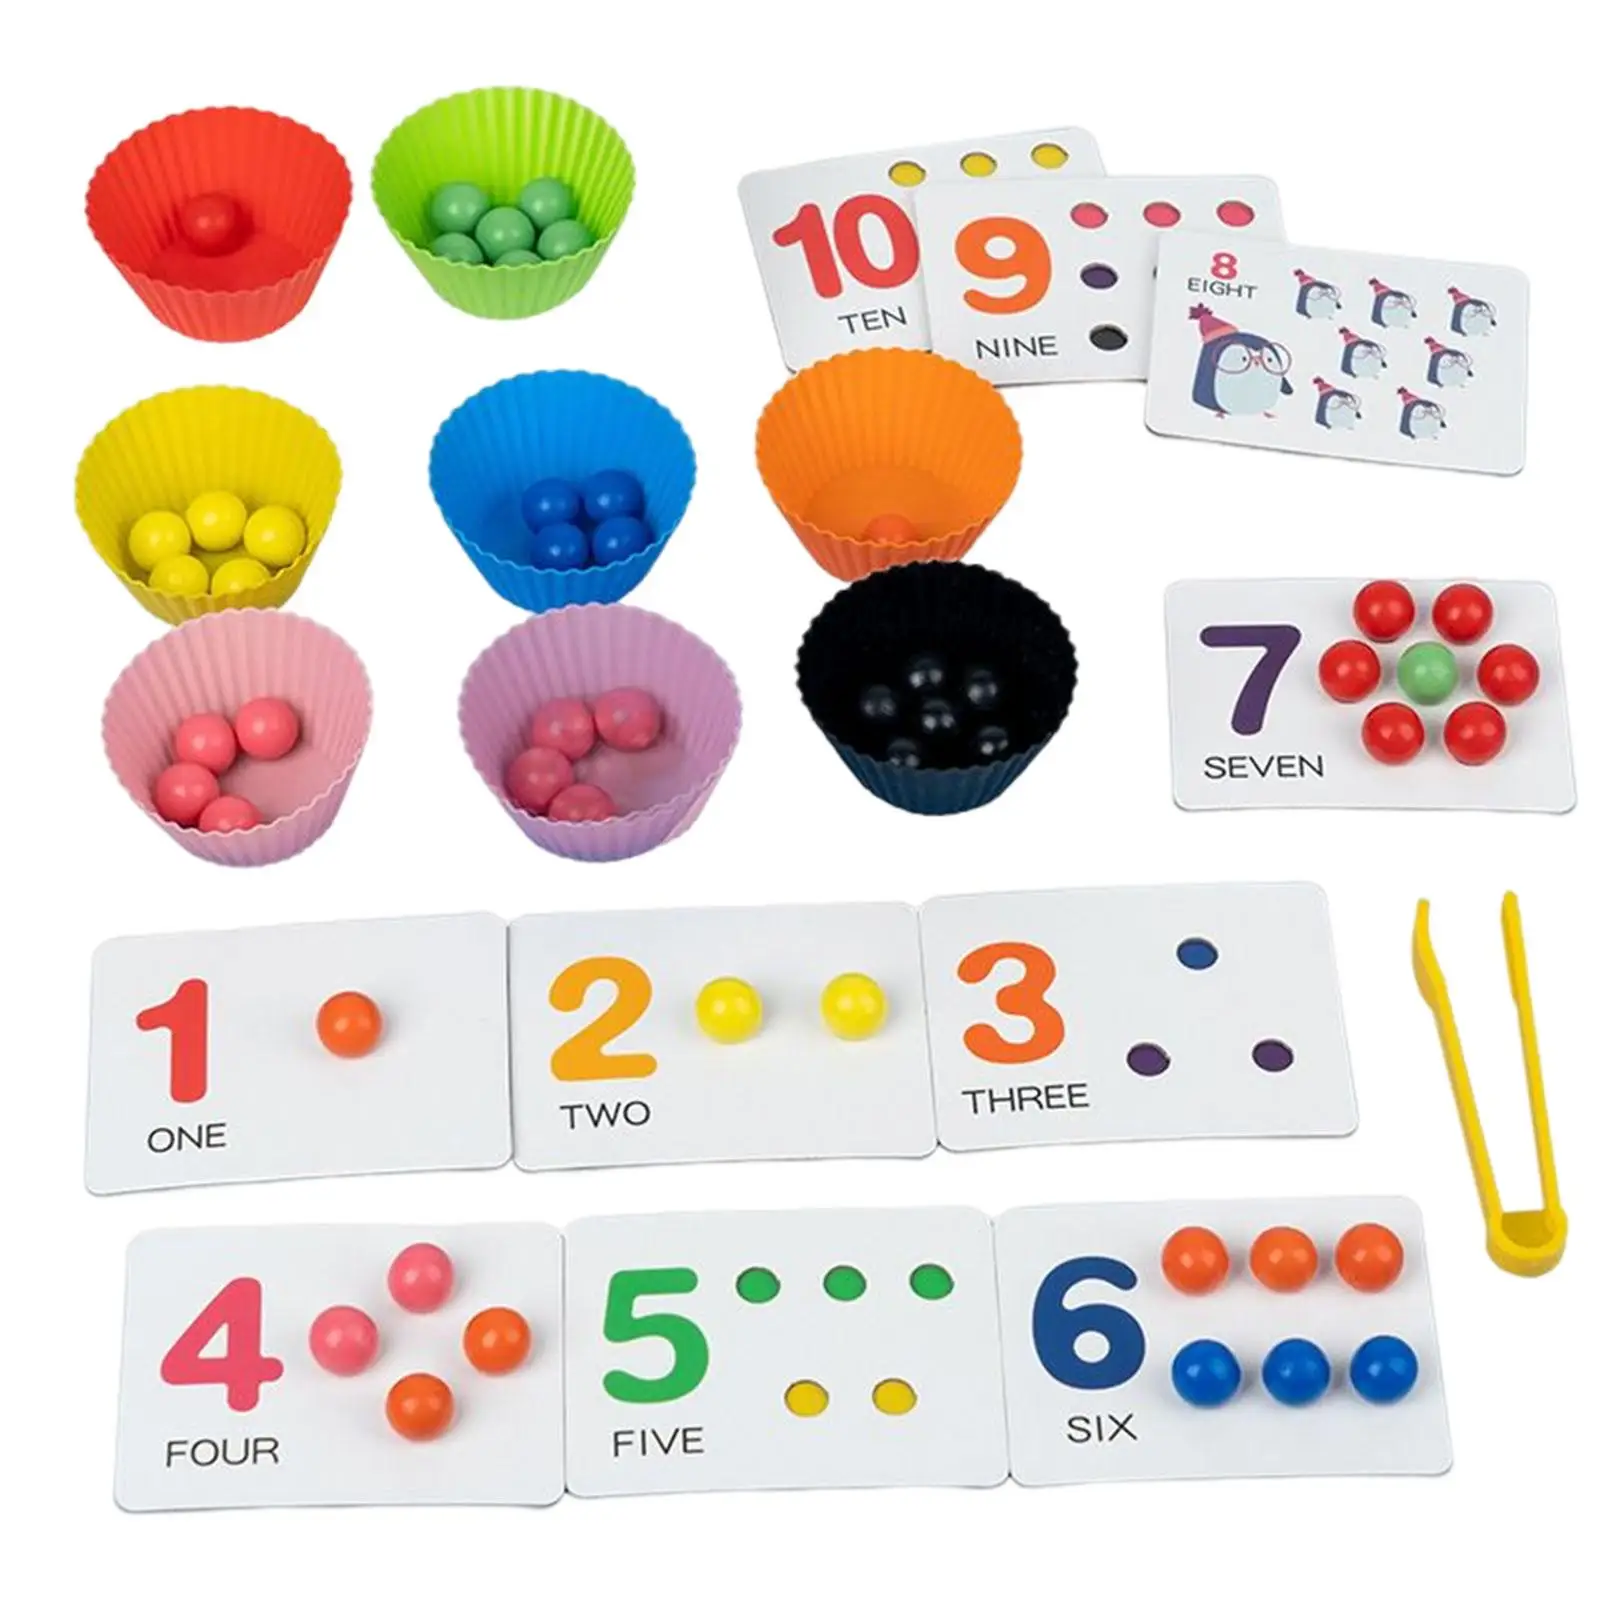 Wooden Rainbow Balls in Cups Math Manipulatives Preschool Learning Toy Wooden Peg Board Game Clip Bead Game for Children